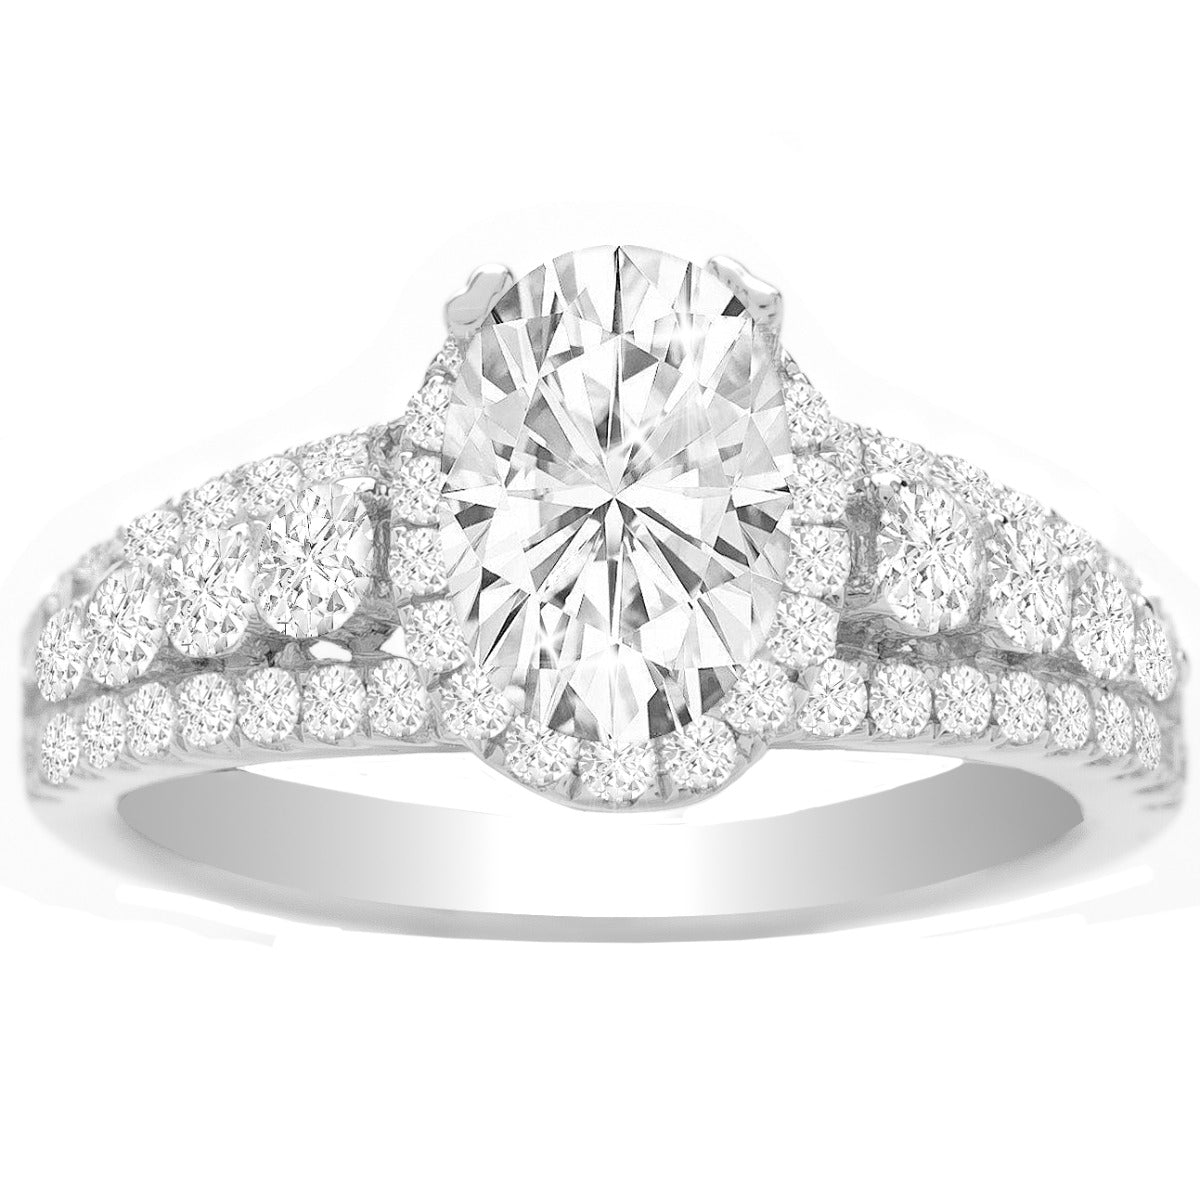 Gendra Oval Halo Engagement Ring in 14K White Gold- 0.70 ct